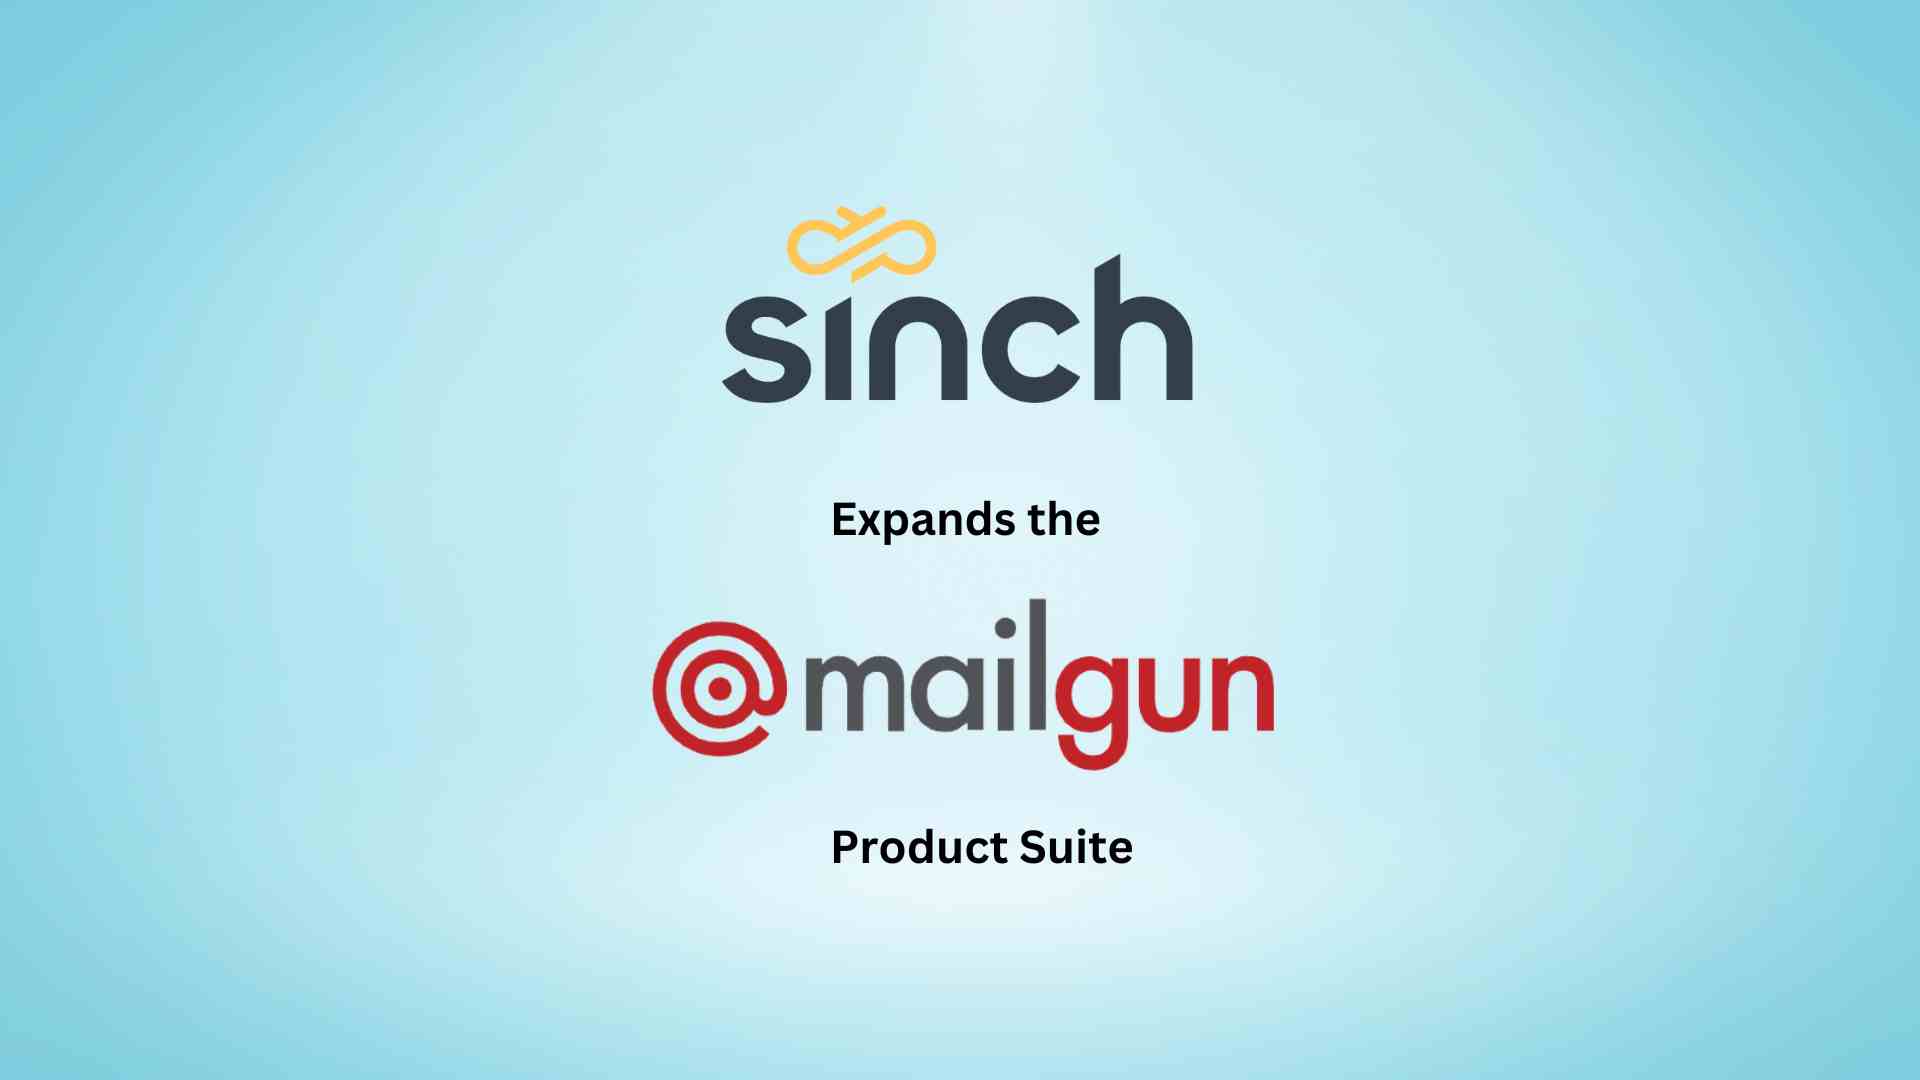 Sinch Expands the Mailgun Product Suite with Mailgun Optimize and Mailgun Validate to Transform Email Deliverability